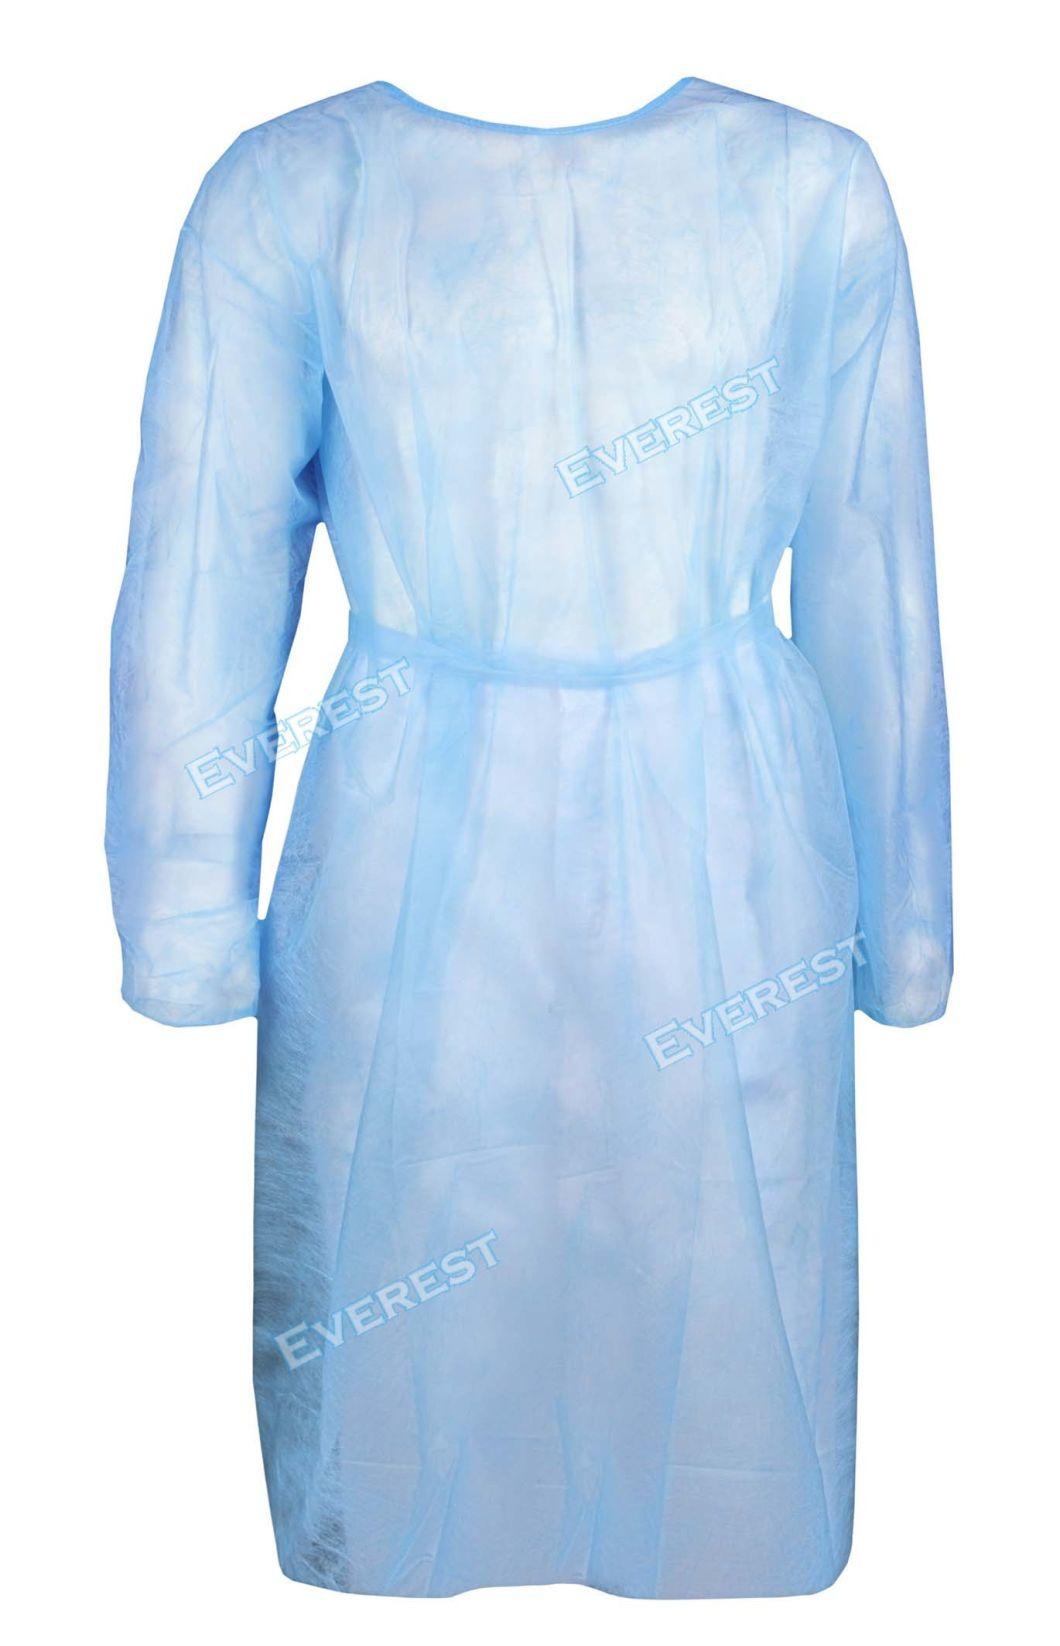 High Quality Sterile Surgical Gown with Drapes